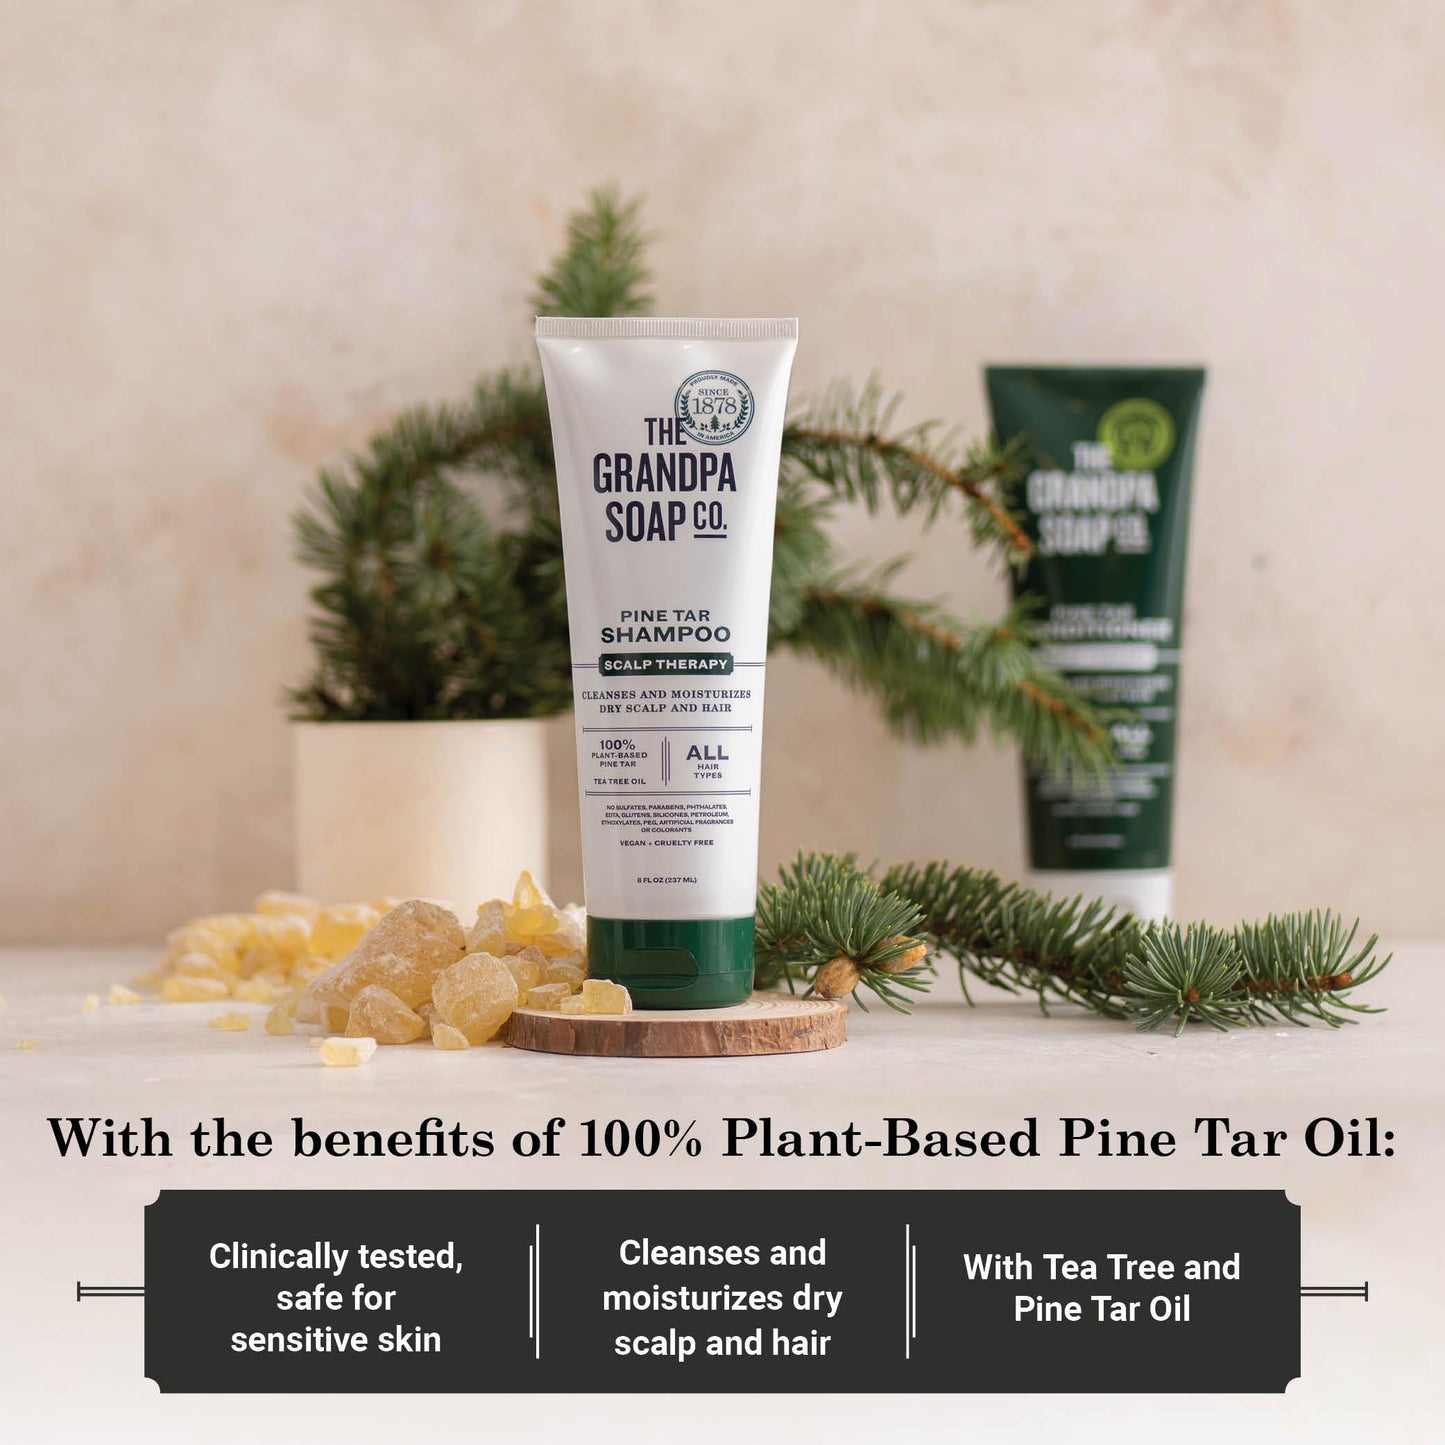 Grandpa's The Soap Company Pine Tar Shampoo - Cleanses and Moisturizes Dry Scalp, With Pine Tar and Tea Tree Oil, All Hair Types, Vegan, Sulfates and Parabens Free, 8 Fl Oz